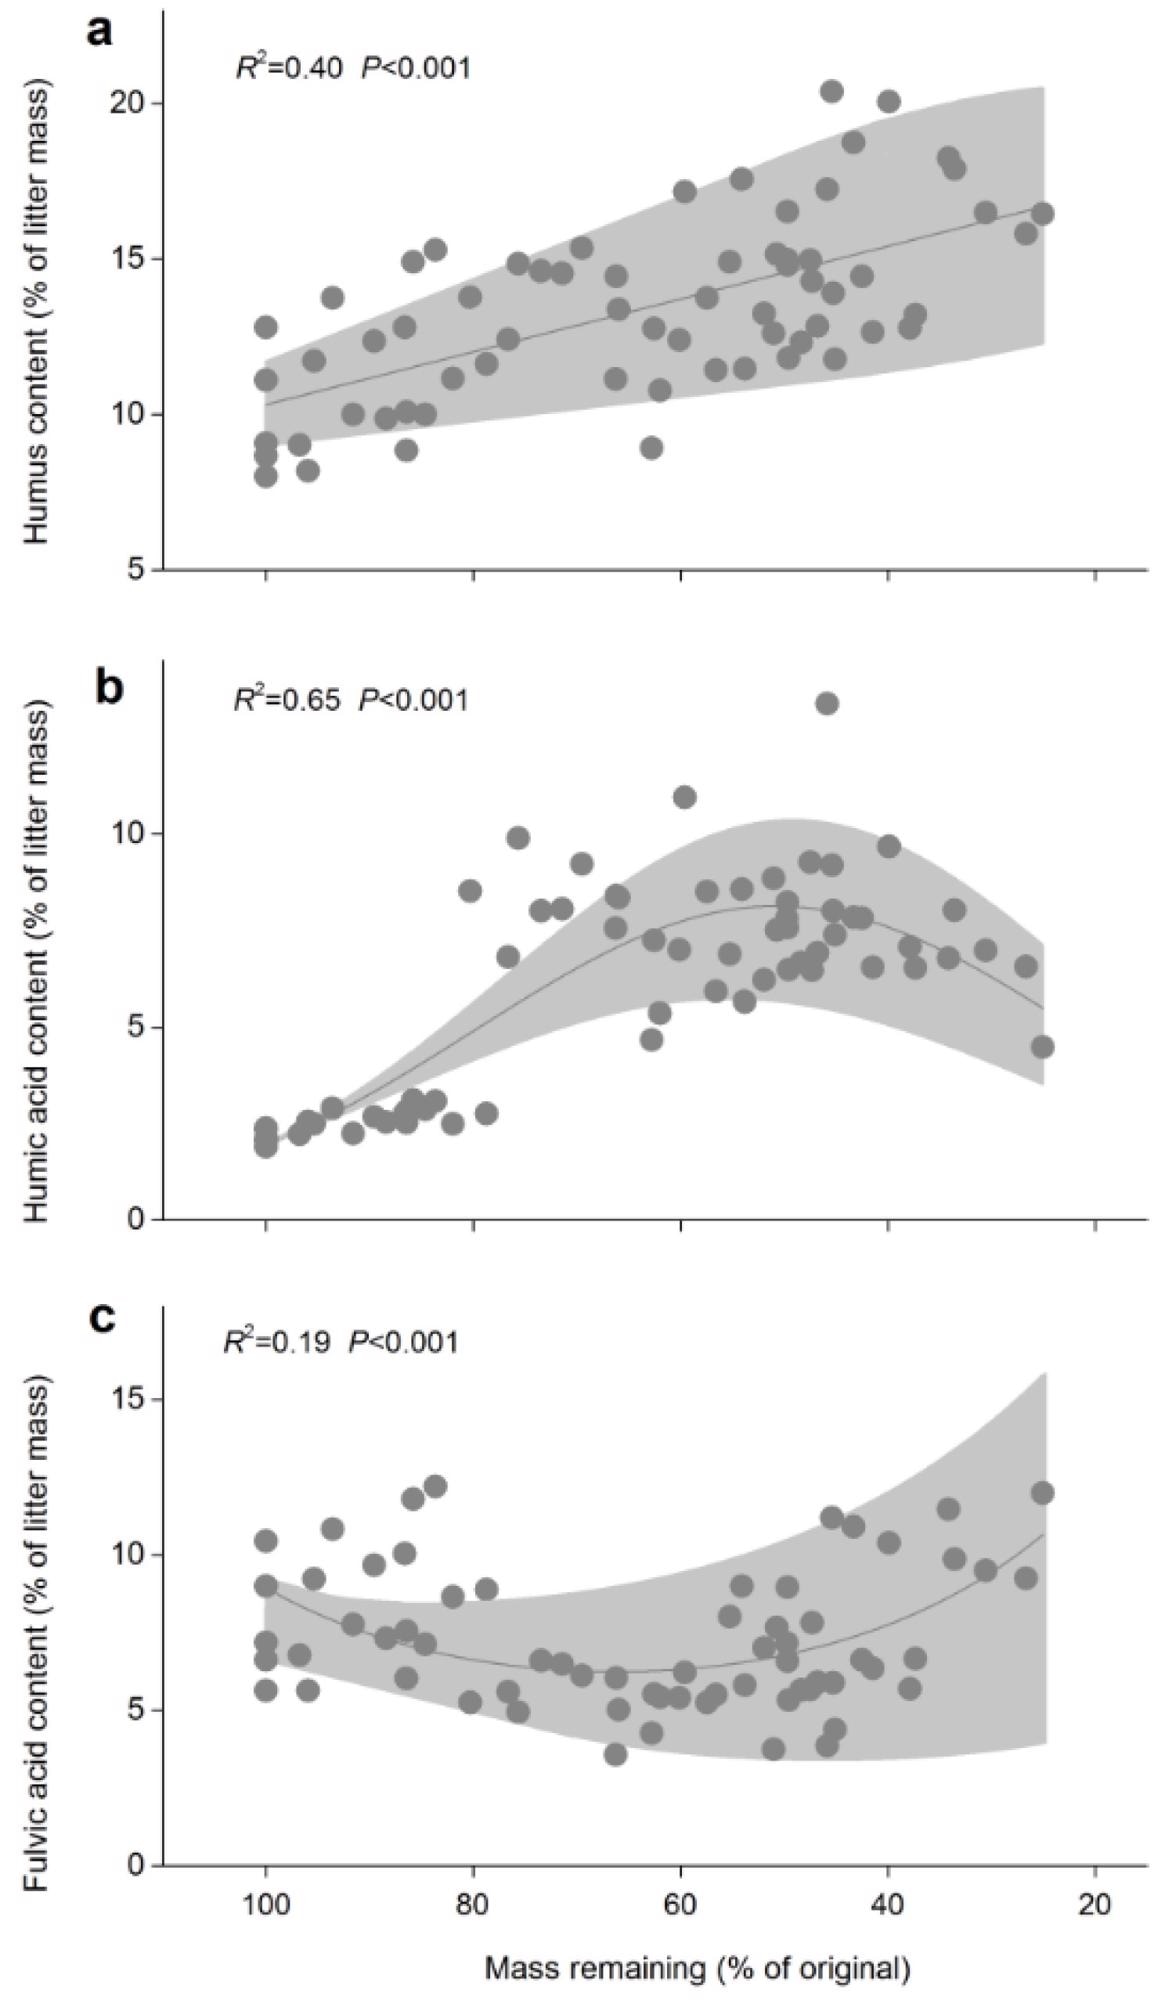 Relationships between the remaining mass and humus contents (a), humic acid contents (b) and fulvic acid contents (c). Shaded areas are 95% confidence intervals. Adjusted R2 and p-values from linear or exponential regressions are shown in each panel (all n = 78).